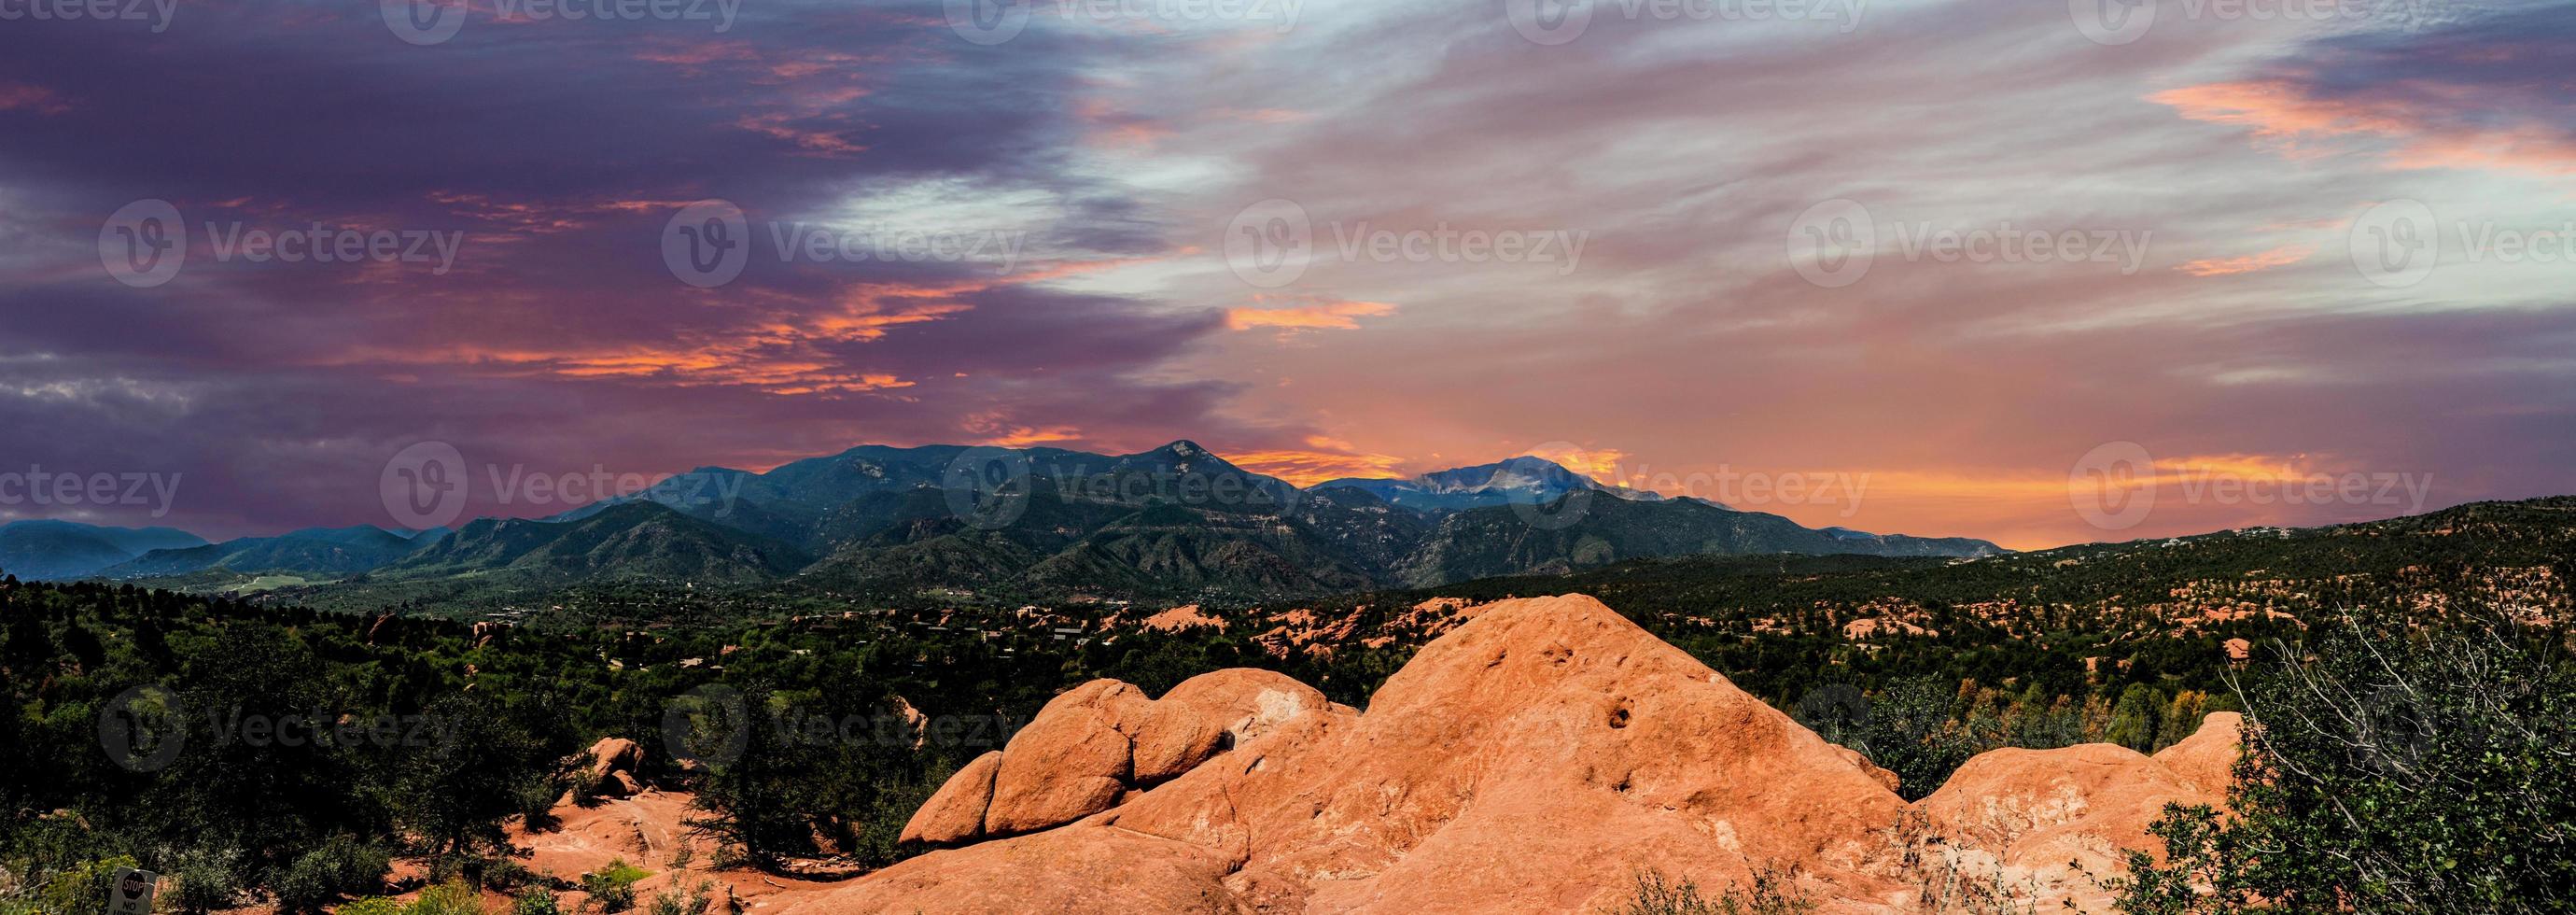 Panoramic landscape view from the Garden of the Gods park looking towards the west and Pikes Peak at the spectacular sunset. photo